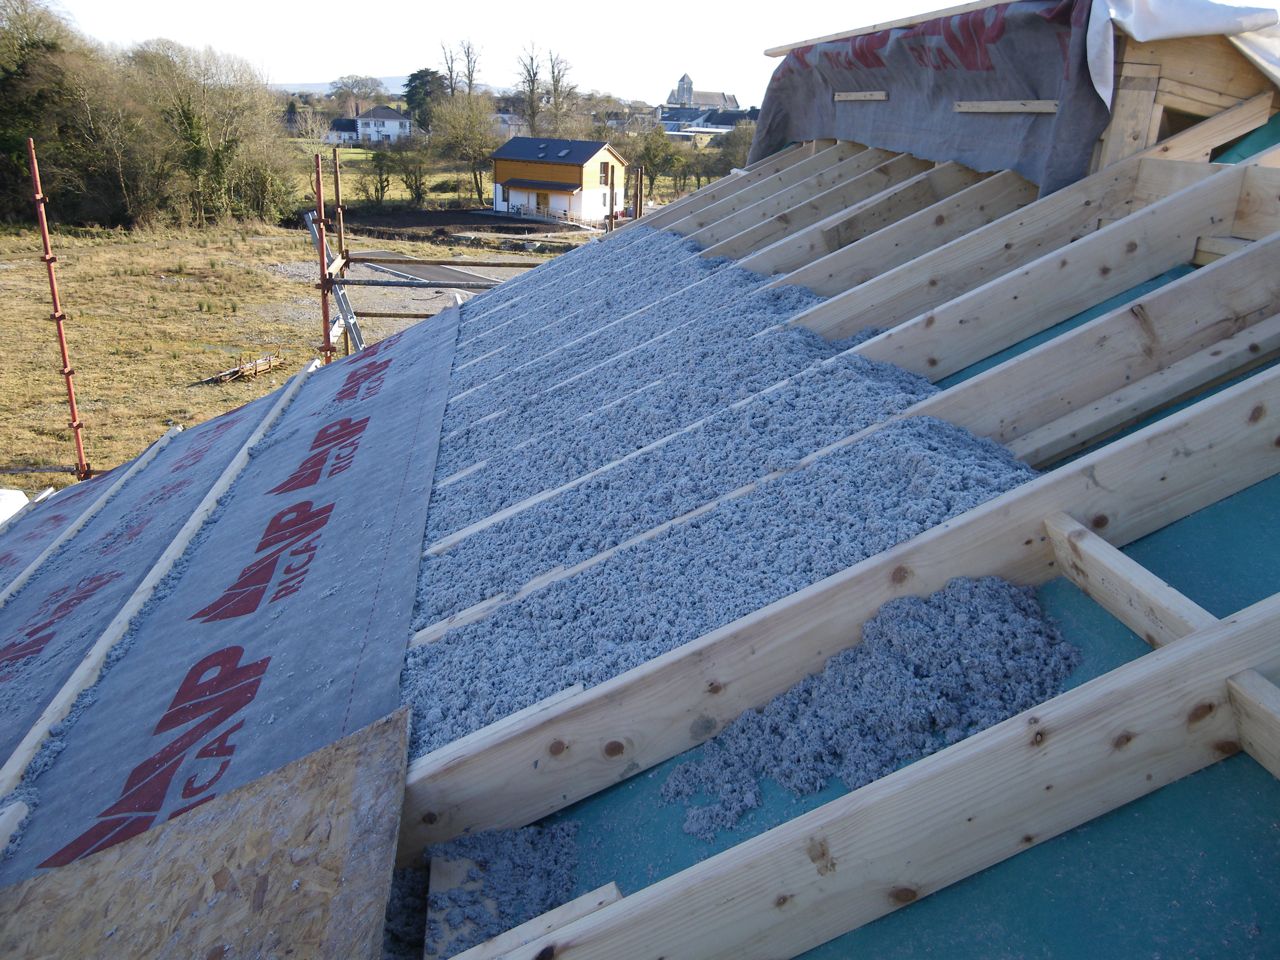 52-53 Build: Warmcell Insulation into the Shed Roof